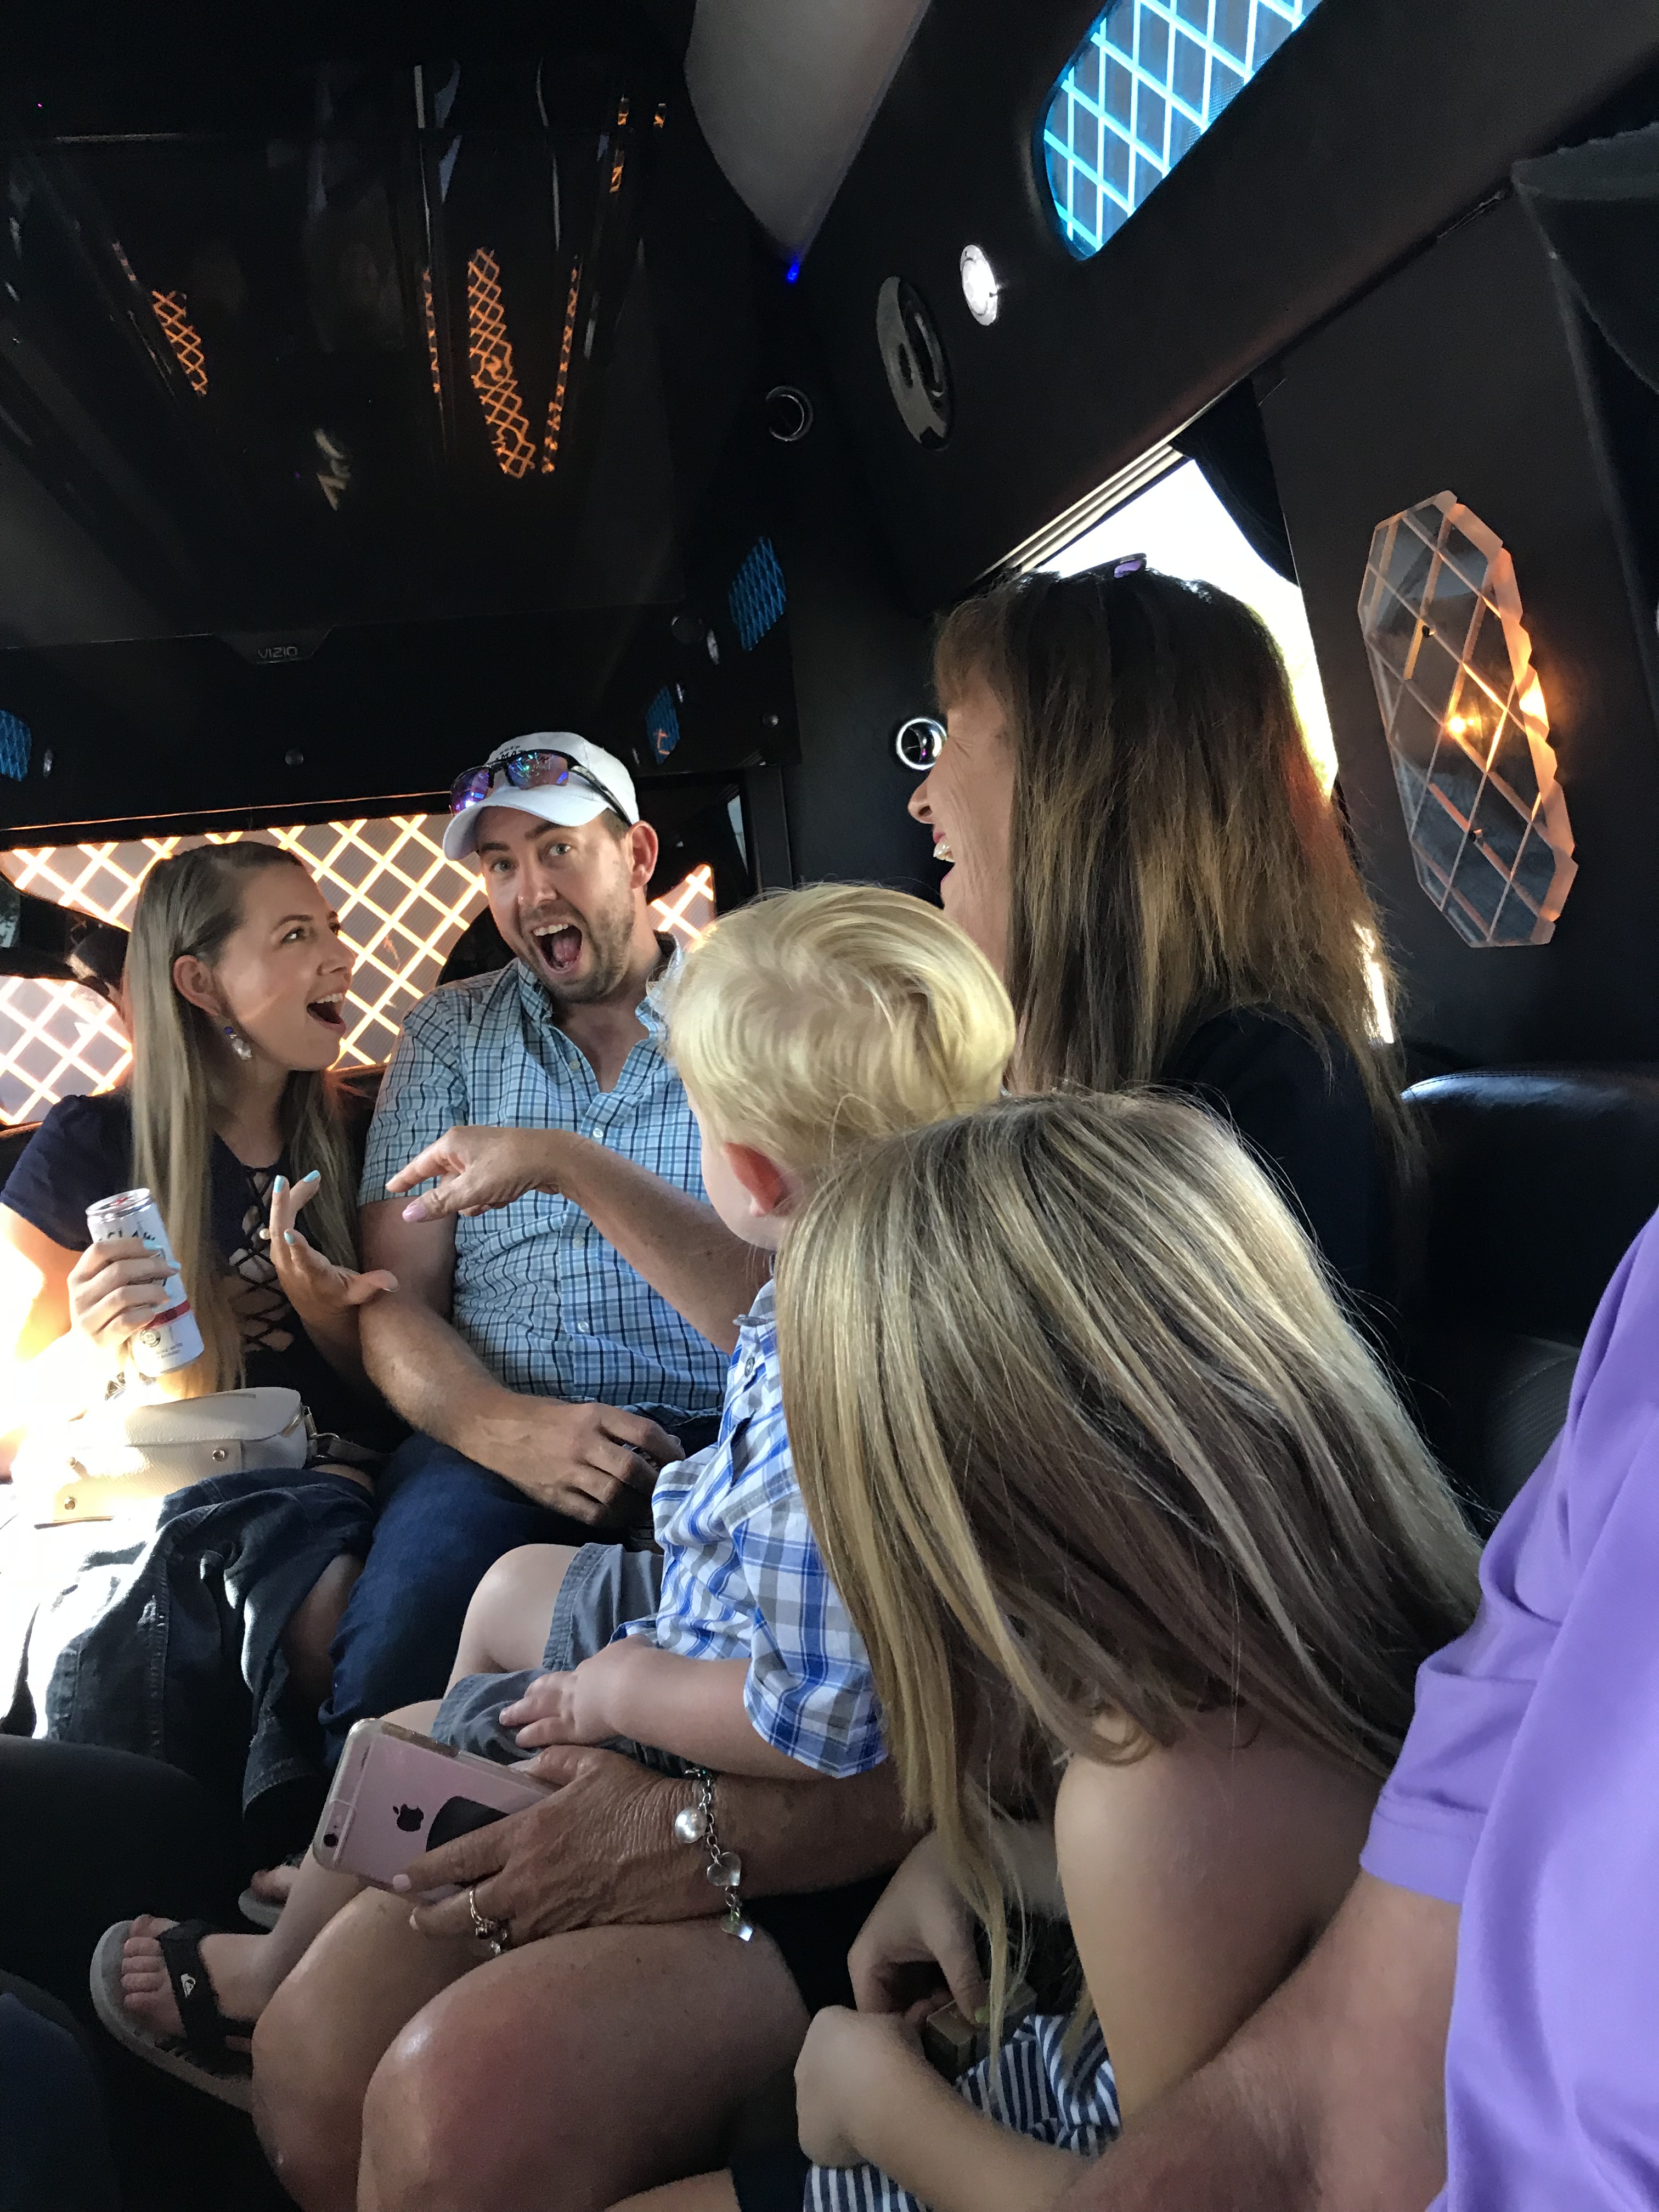 All In One Limo Party Bus!